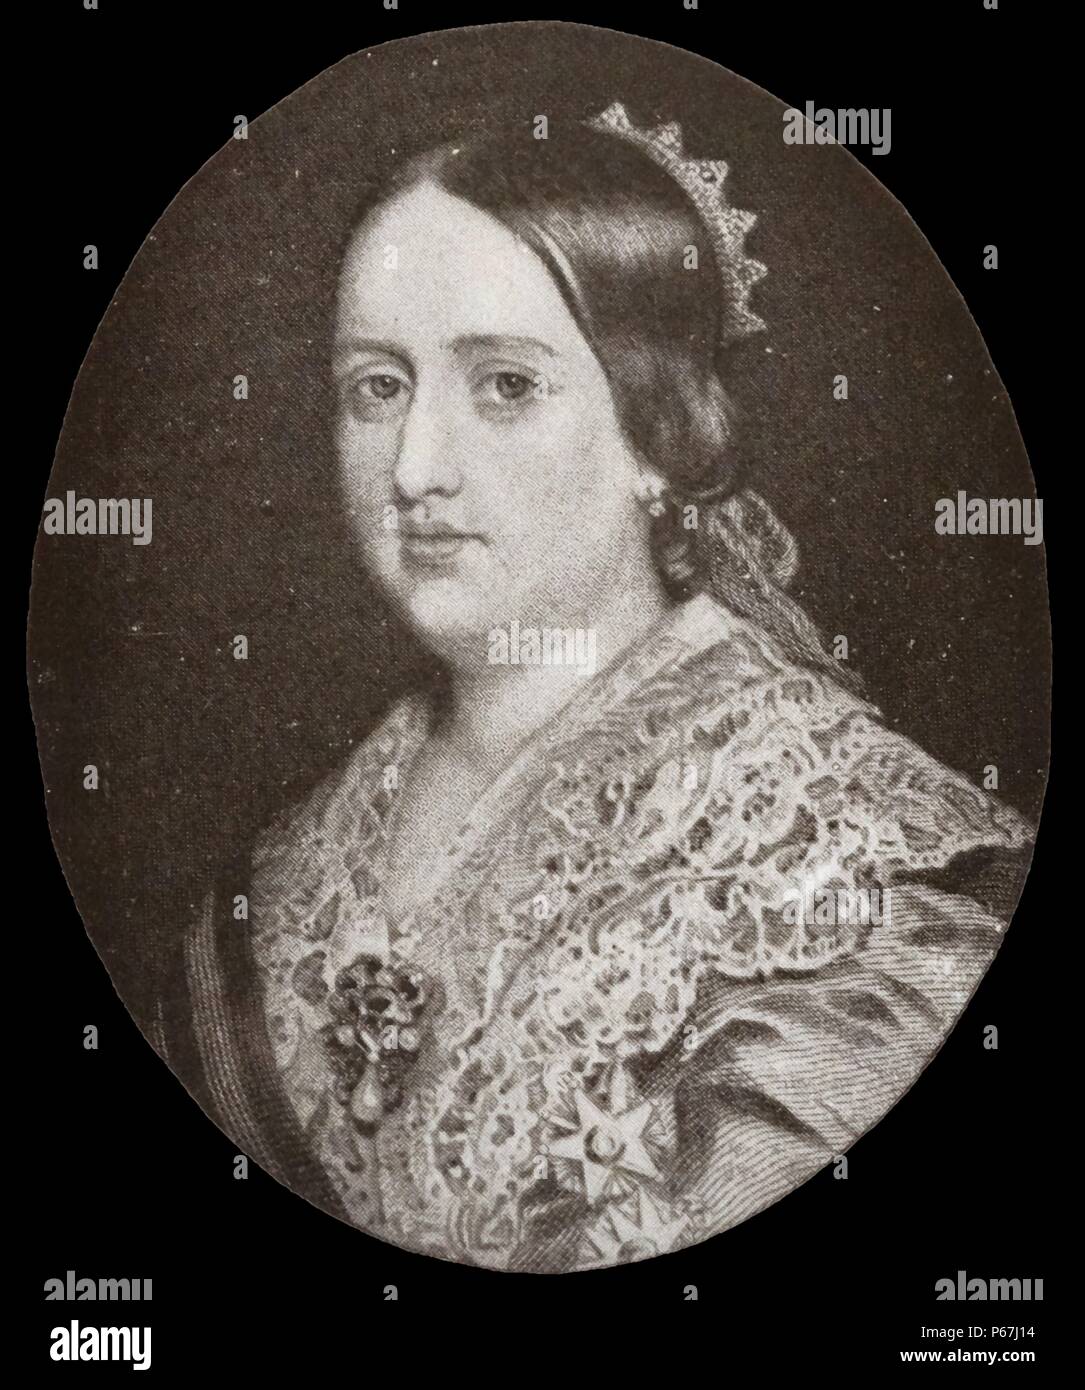 Dona Maria II (4 April 1819 – 15 November 1853) 'the Educator' Queen regnant of Portugal from 1826 to 1828 and again from 1834 to 1853. Stock Photo